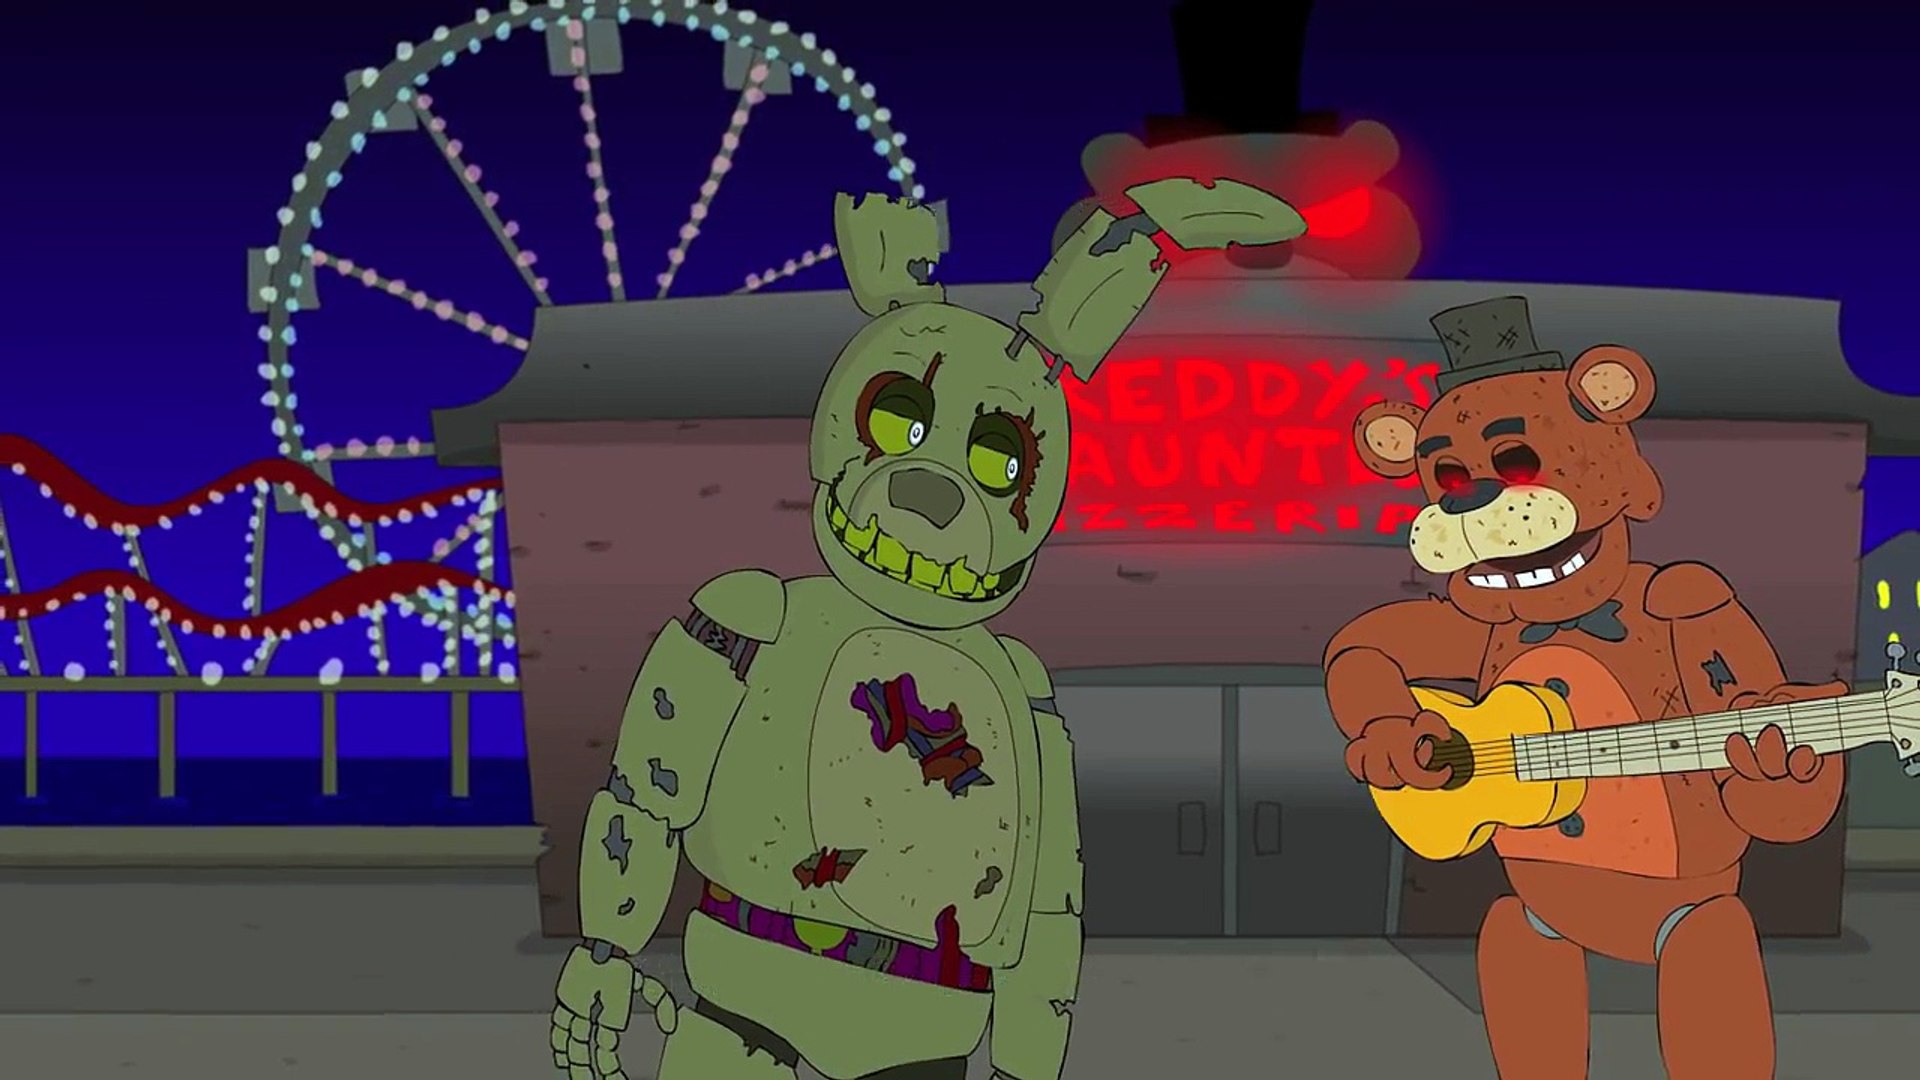 ♪ FIVE NIGHTS AT FREDDY'S 3 THE MUSICAL - Animation Song 